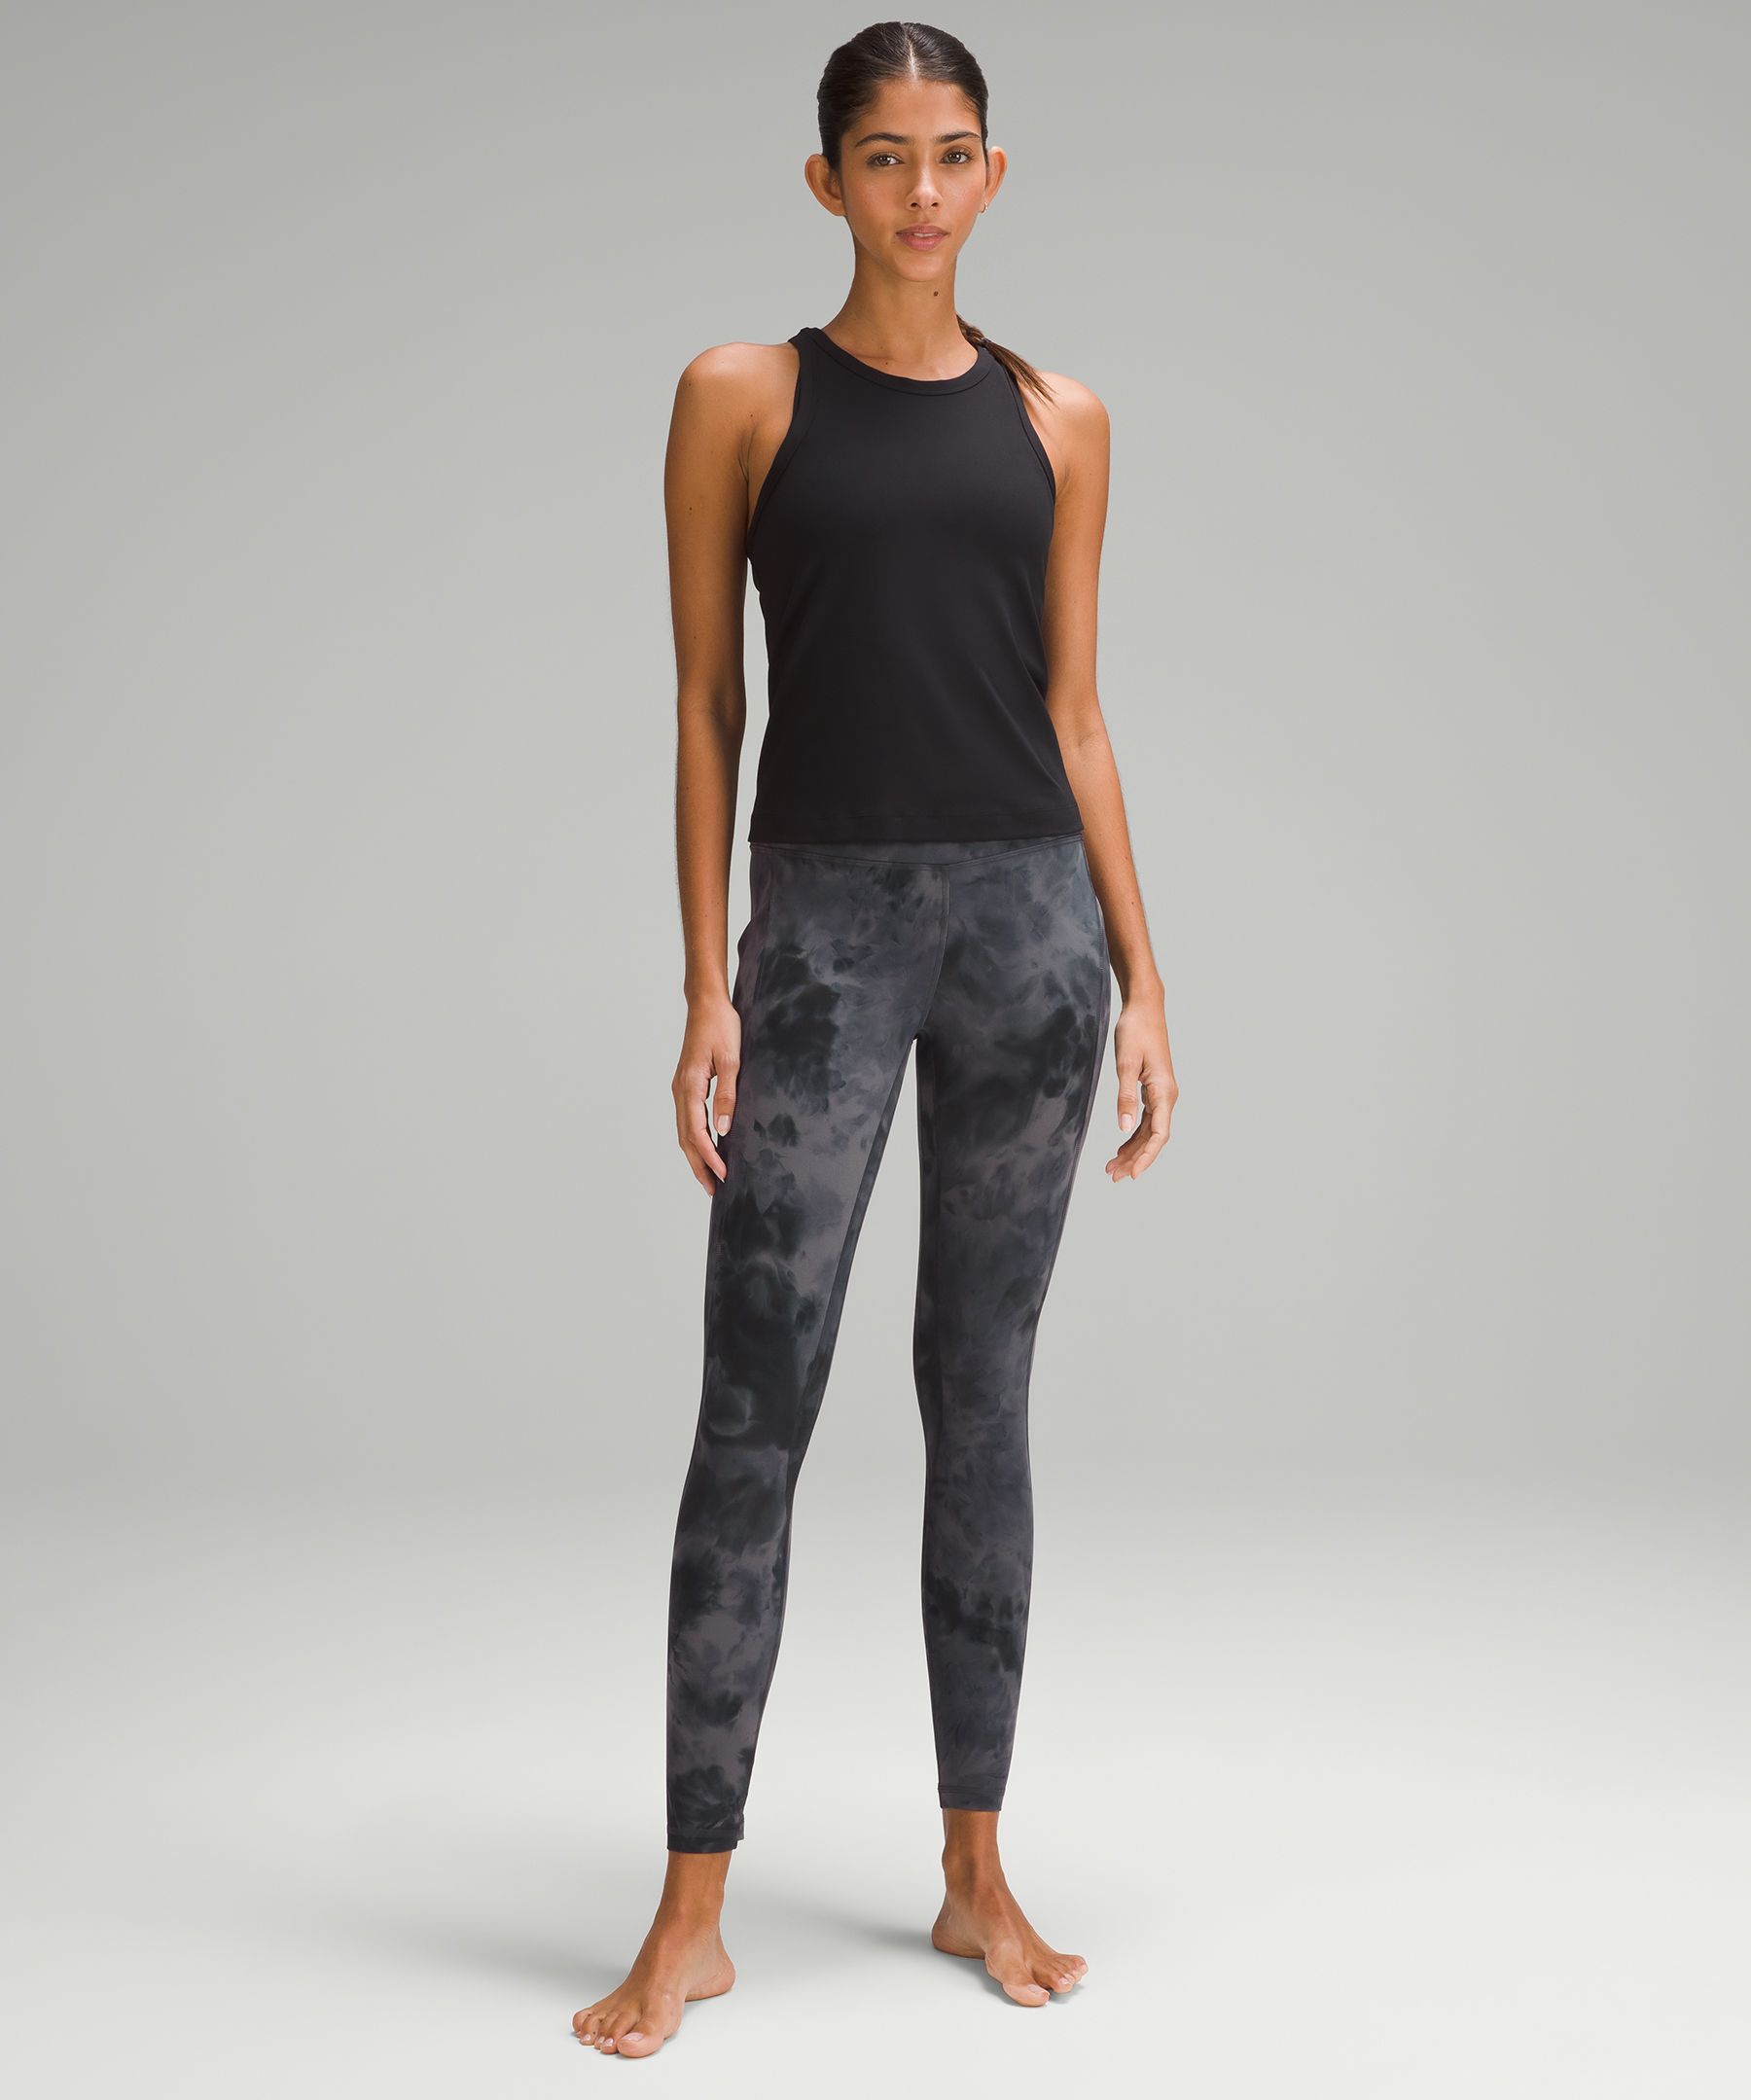 Lululemon Align™ High-Rise Pant with Pockets 25". 2